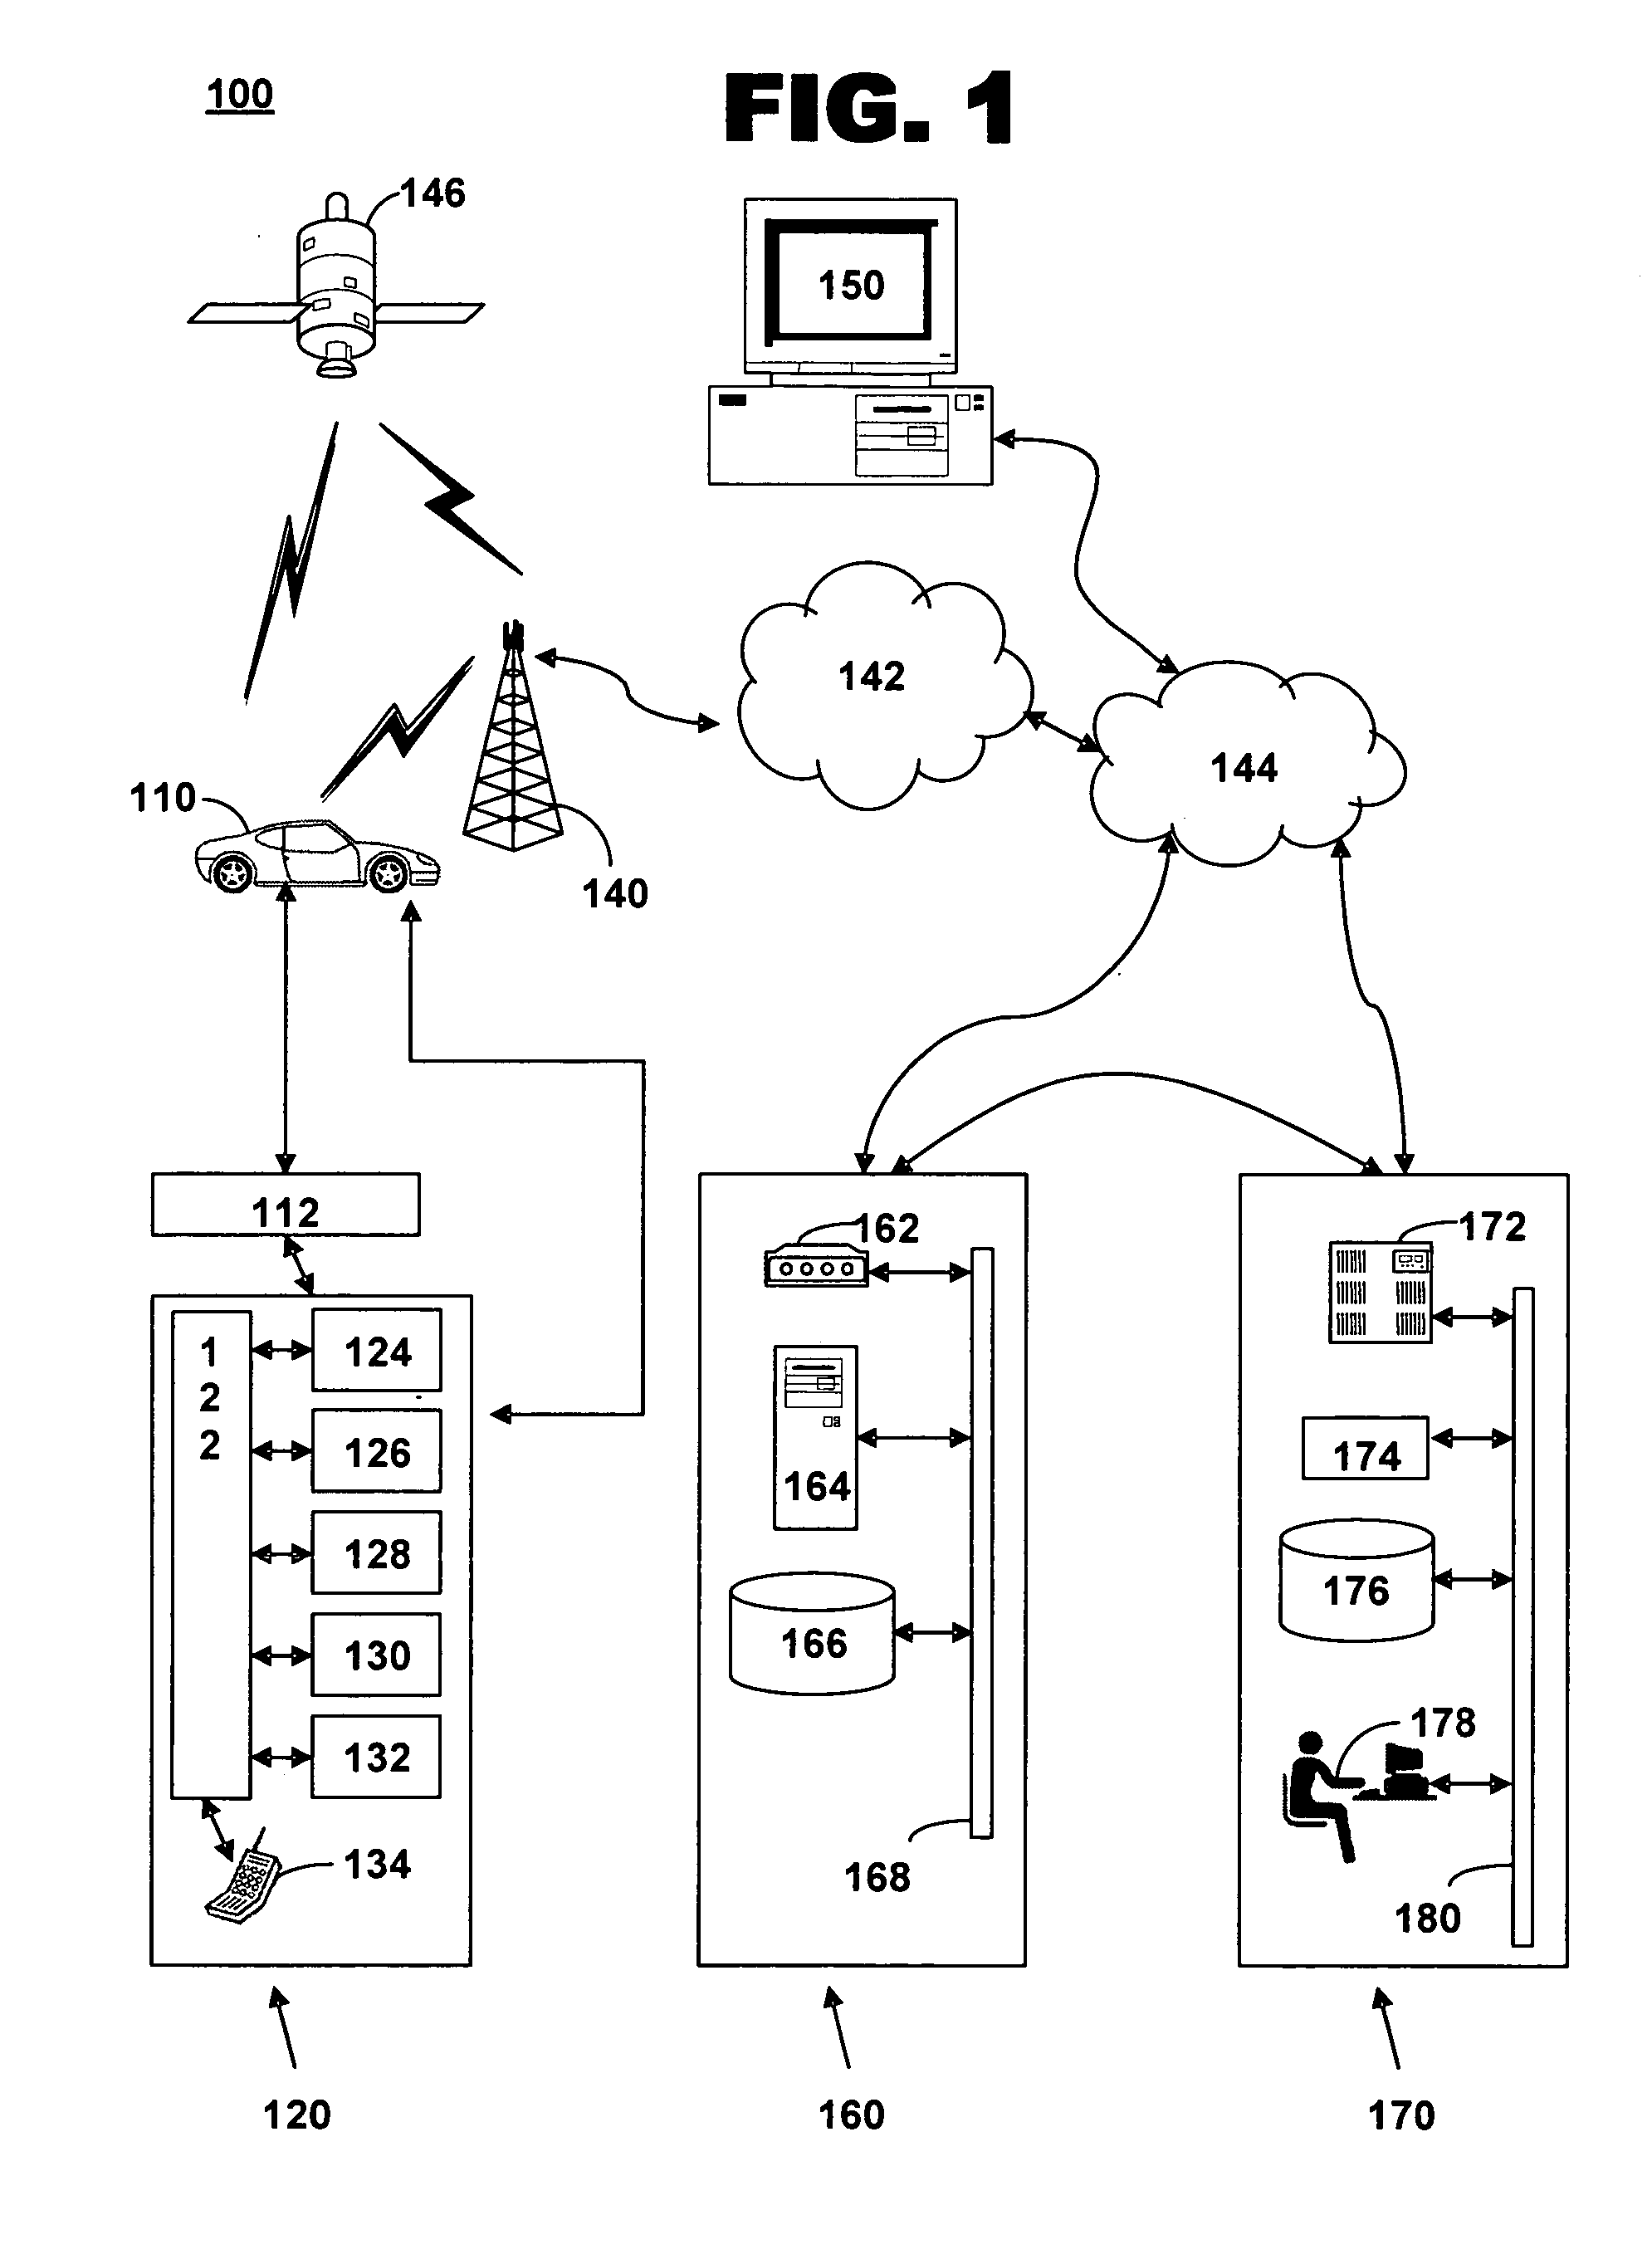 System and method for data correlation within a telematics communication system